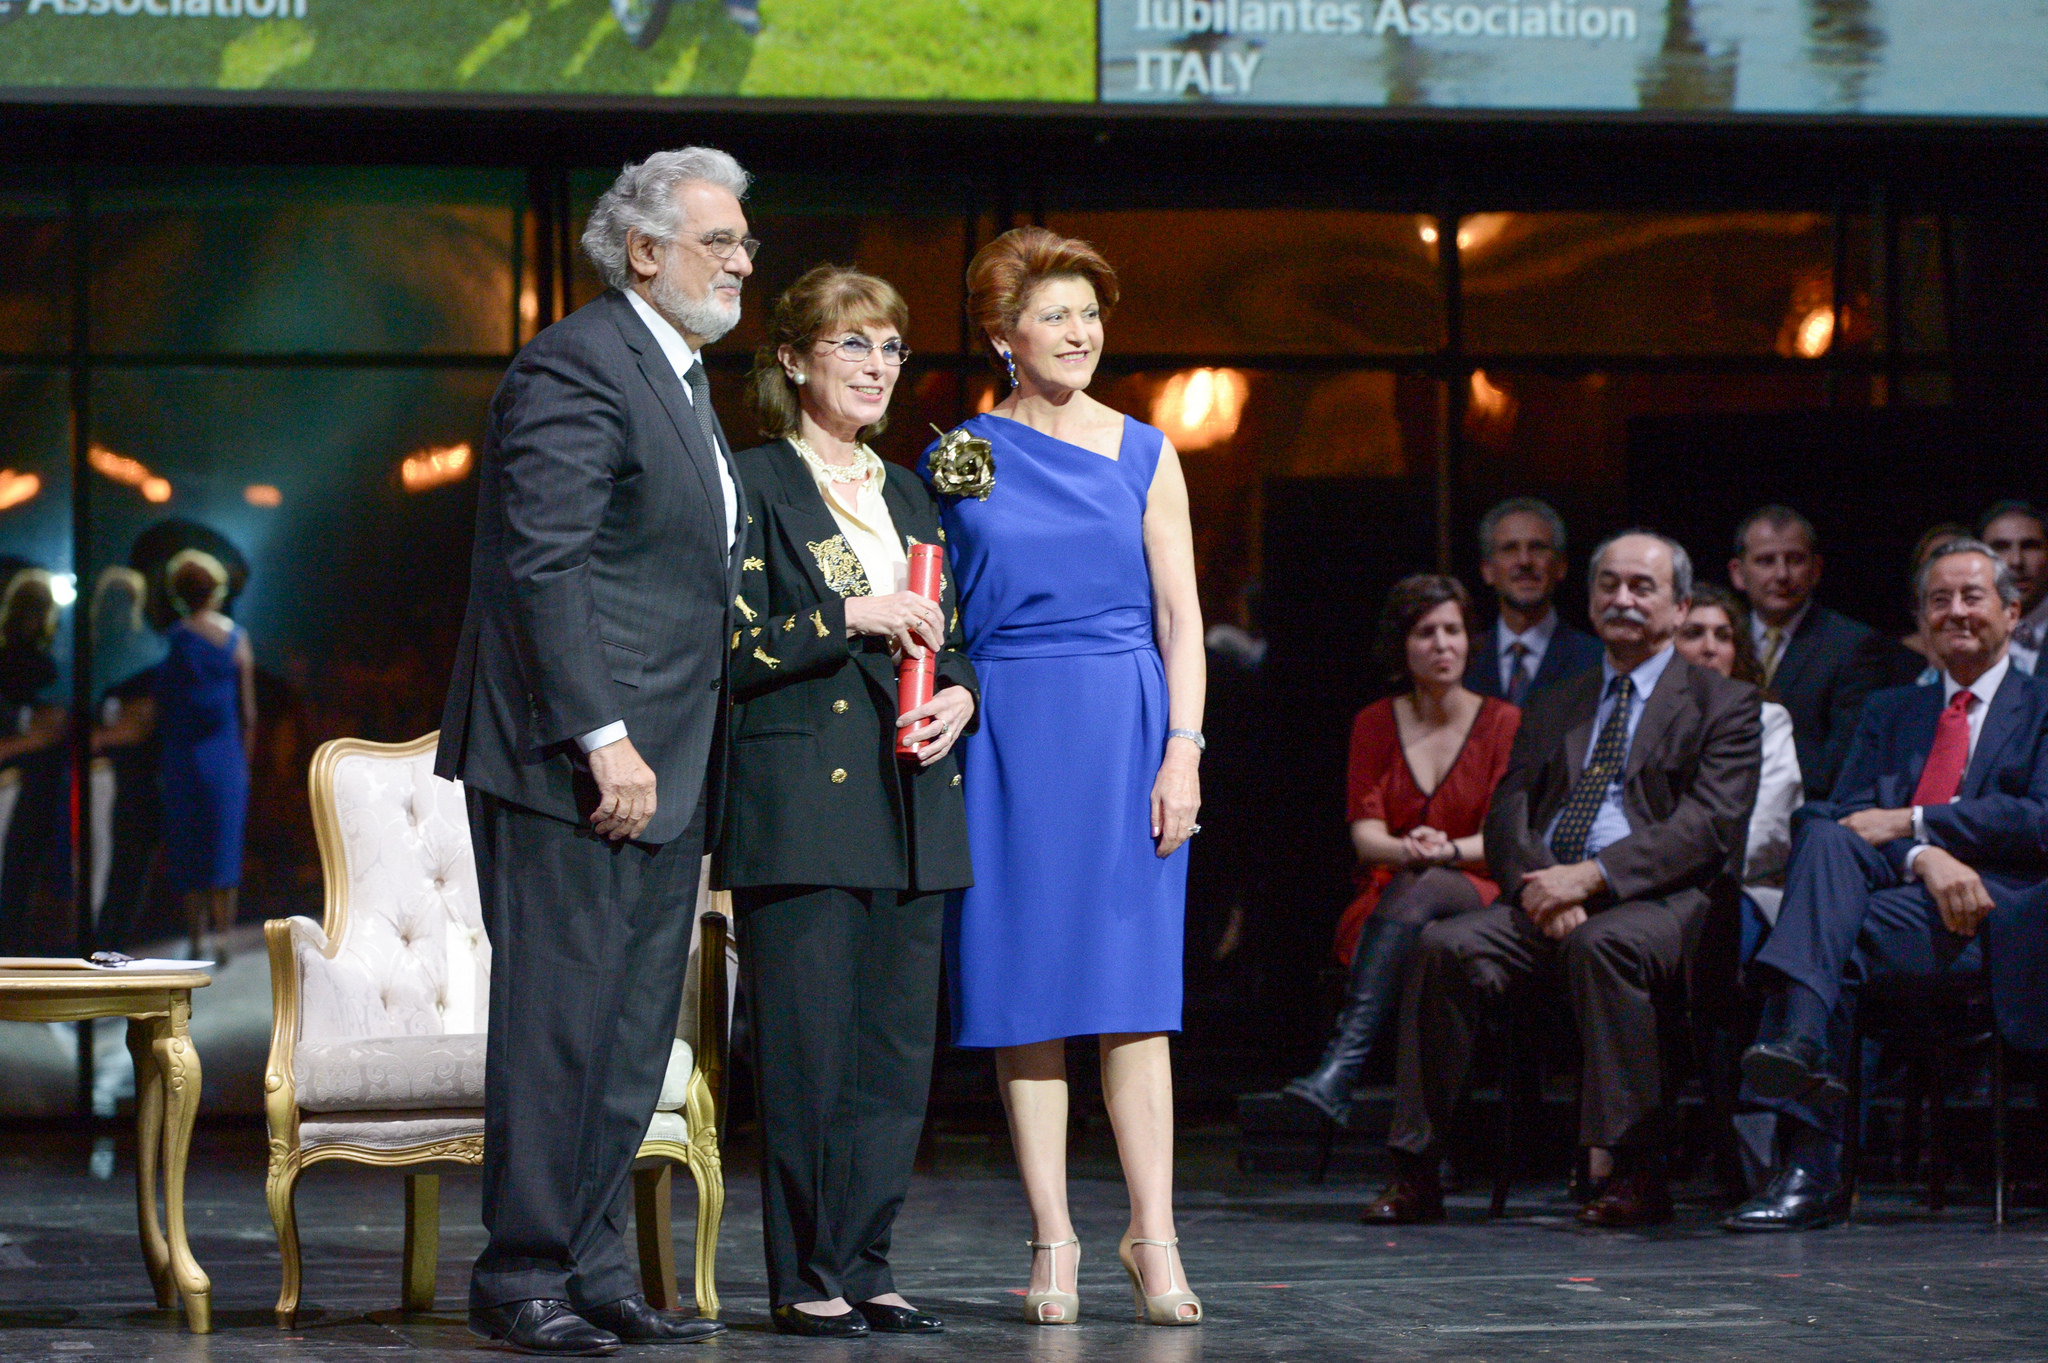 The Klimt Society’s President received the Award from Plácido Domingo, President of Europa Nostra, and Androulla Vassiliou, former European Commissioner for Culture, at the European Heritage Awards Ceremony in Vienna on 5 May 2014. Photo Oreste Schaller